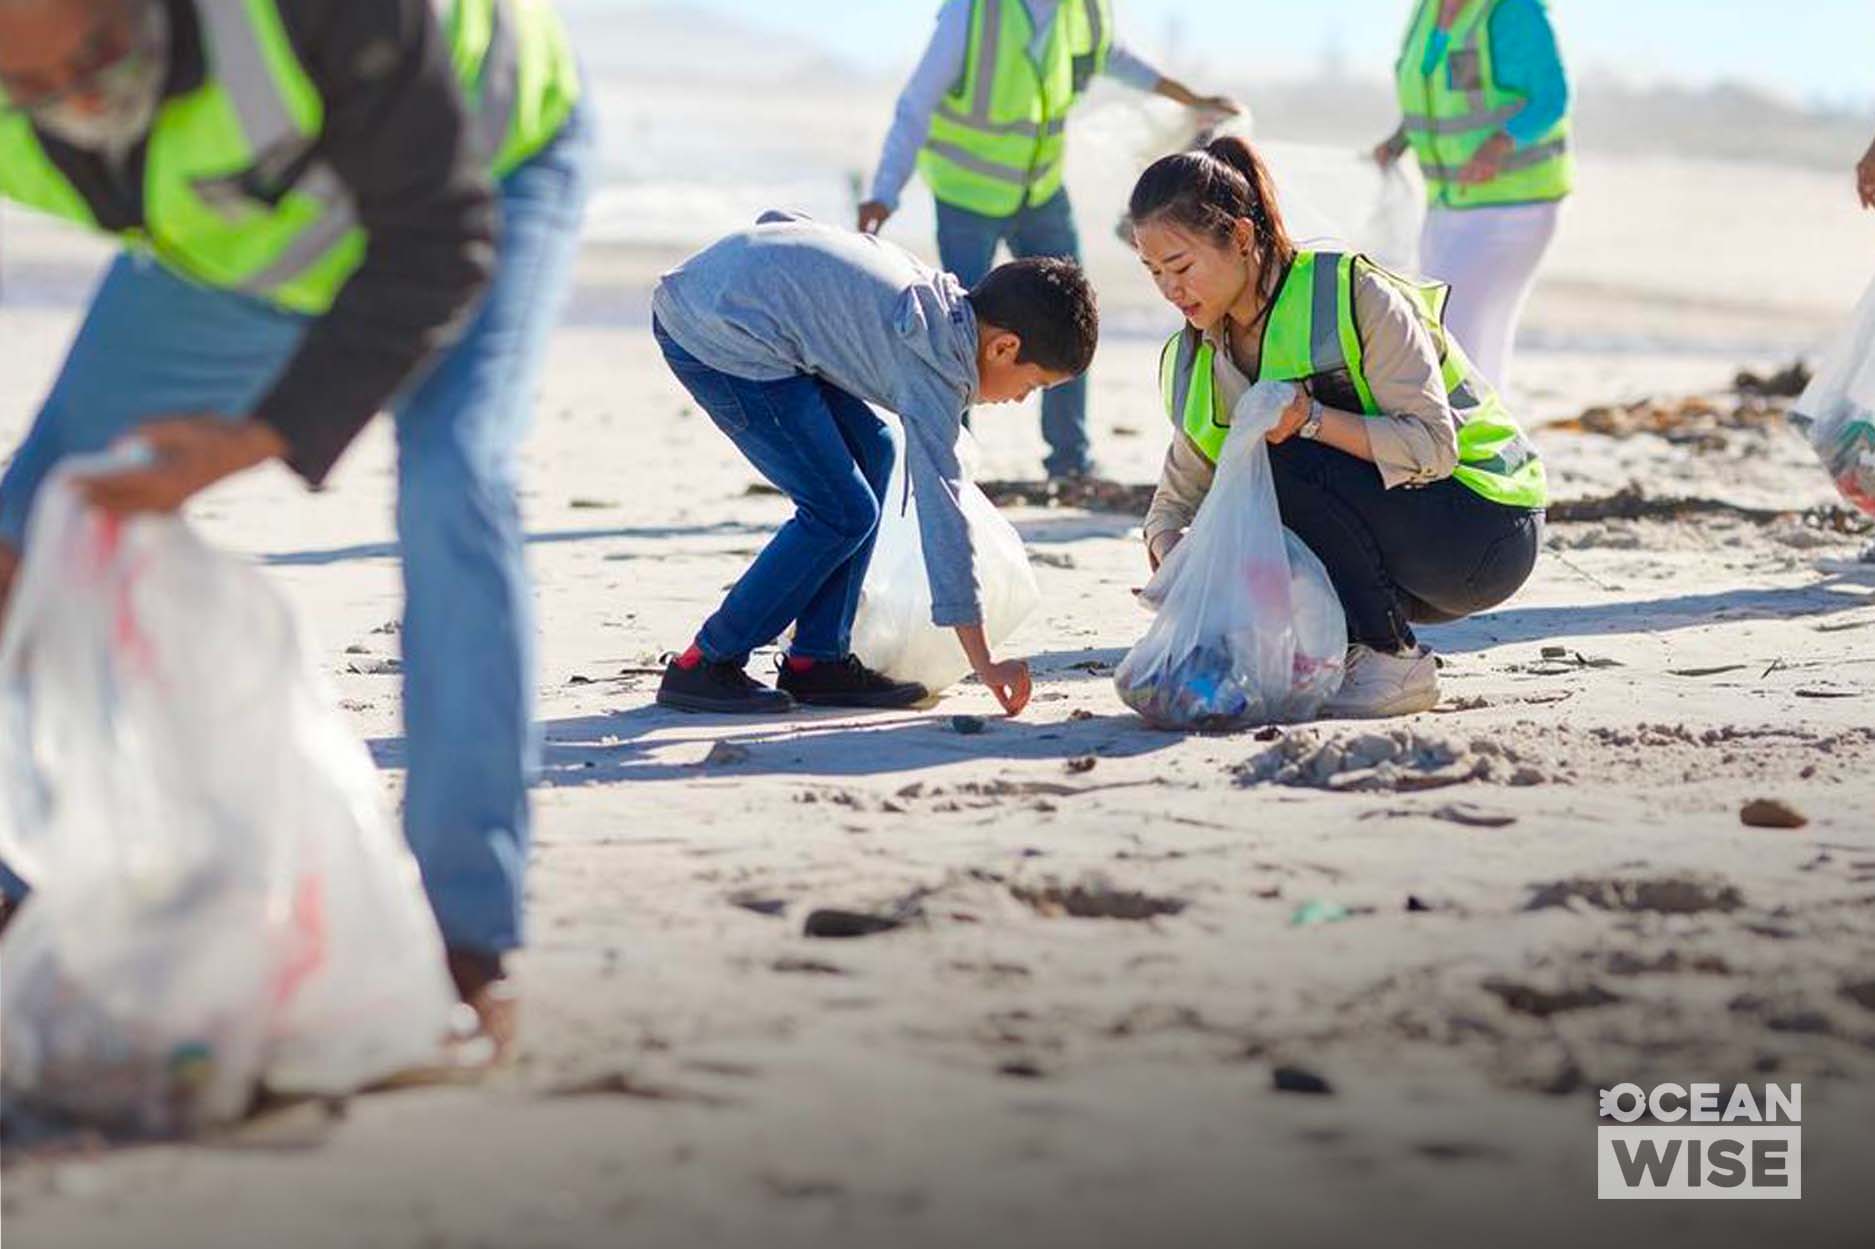 Sandy beach cleanup with people kneeling to pick up garbage and put it in white plastic bags.